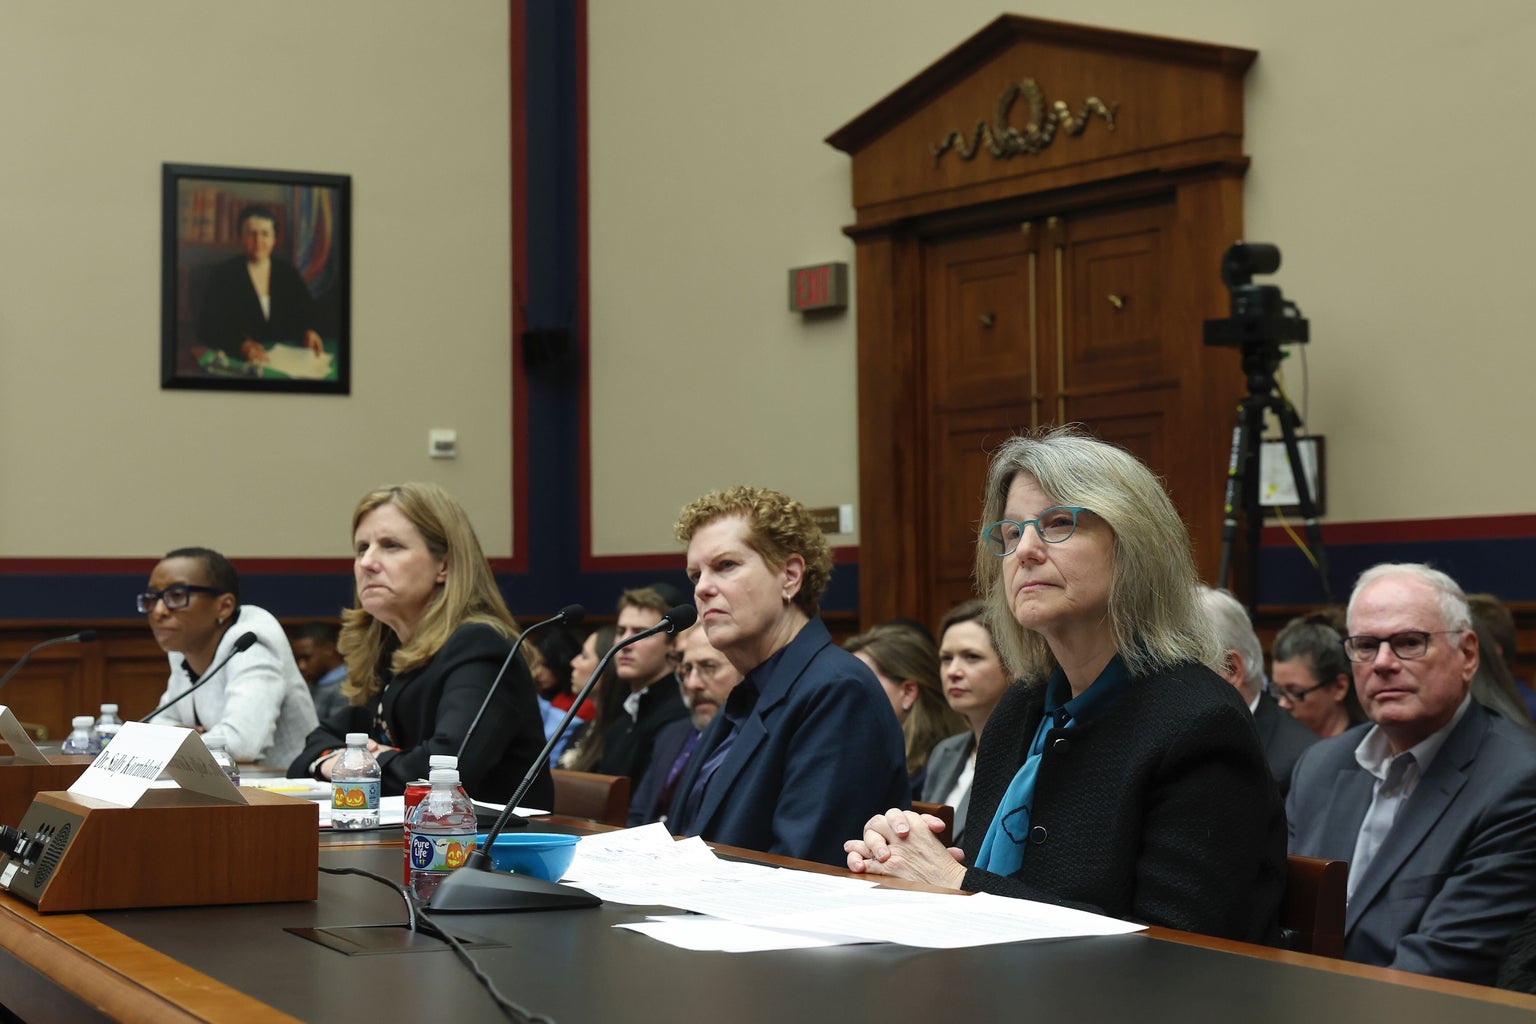 Dr. Claudine Gay, President of Harvard University, Liz Magill, President of University of Pennsylvania, Dr. Pamela Nadell, Professor of History and Jewish Studies at American University, and Dr. Sally Kornbluth, President of Massachusetts Institute of Technology, testify before the House Education and Workforce Committee at the Rayburn House Office Building on December 05, 2023 in Washington, DC. The Committee held a hearing to investigate antisemitism on college campuses.